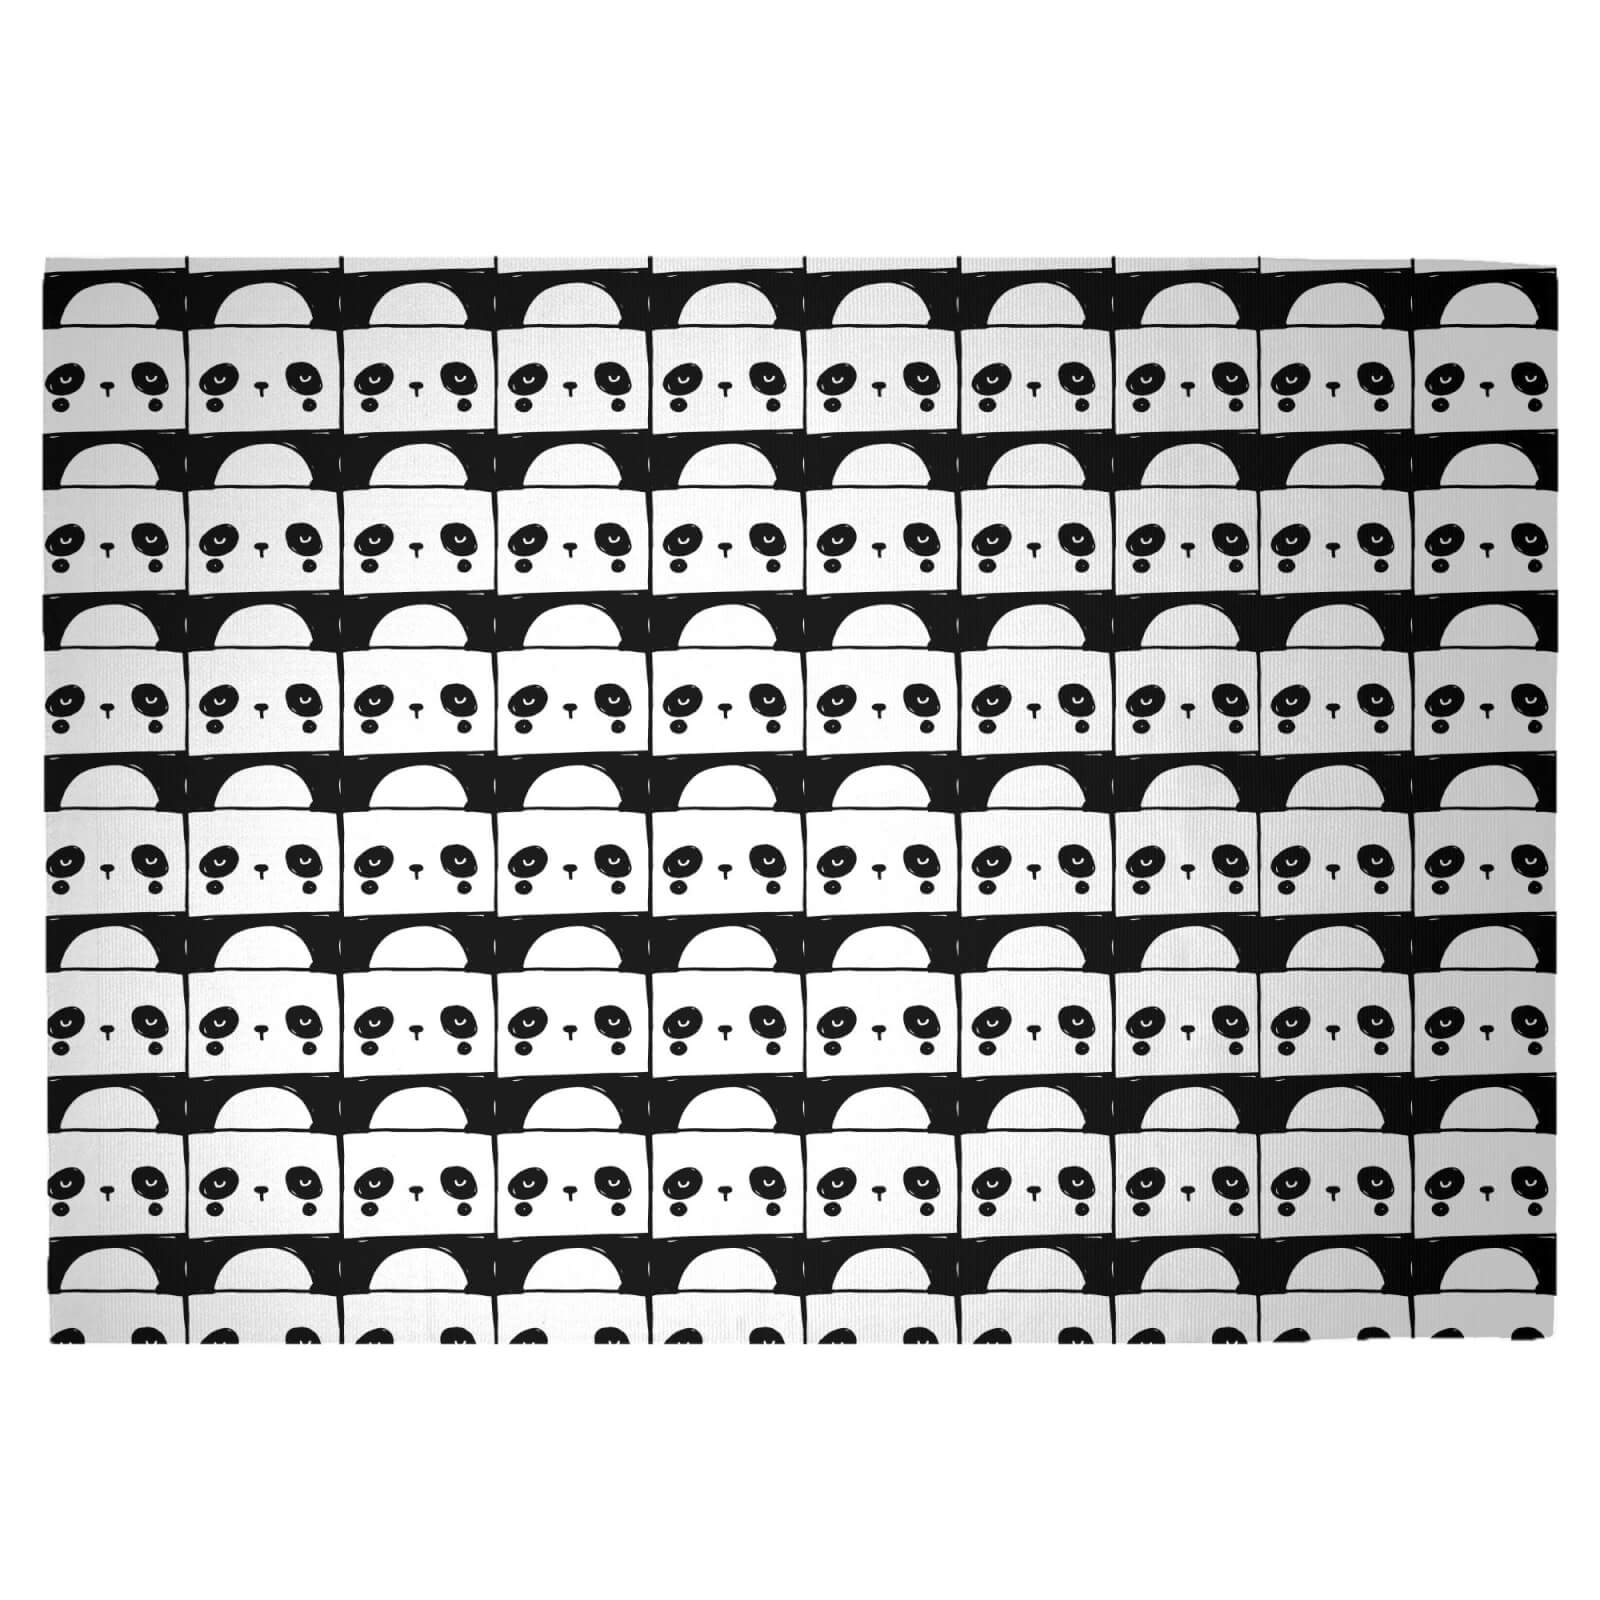 Panda Party Woven Rug - Large